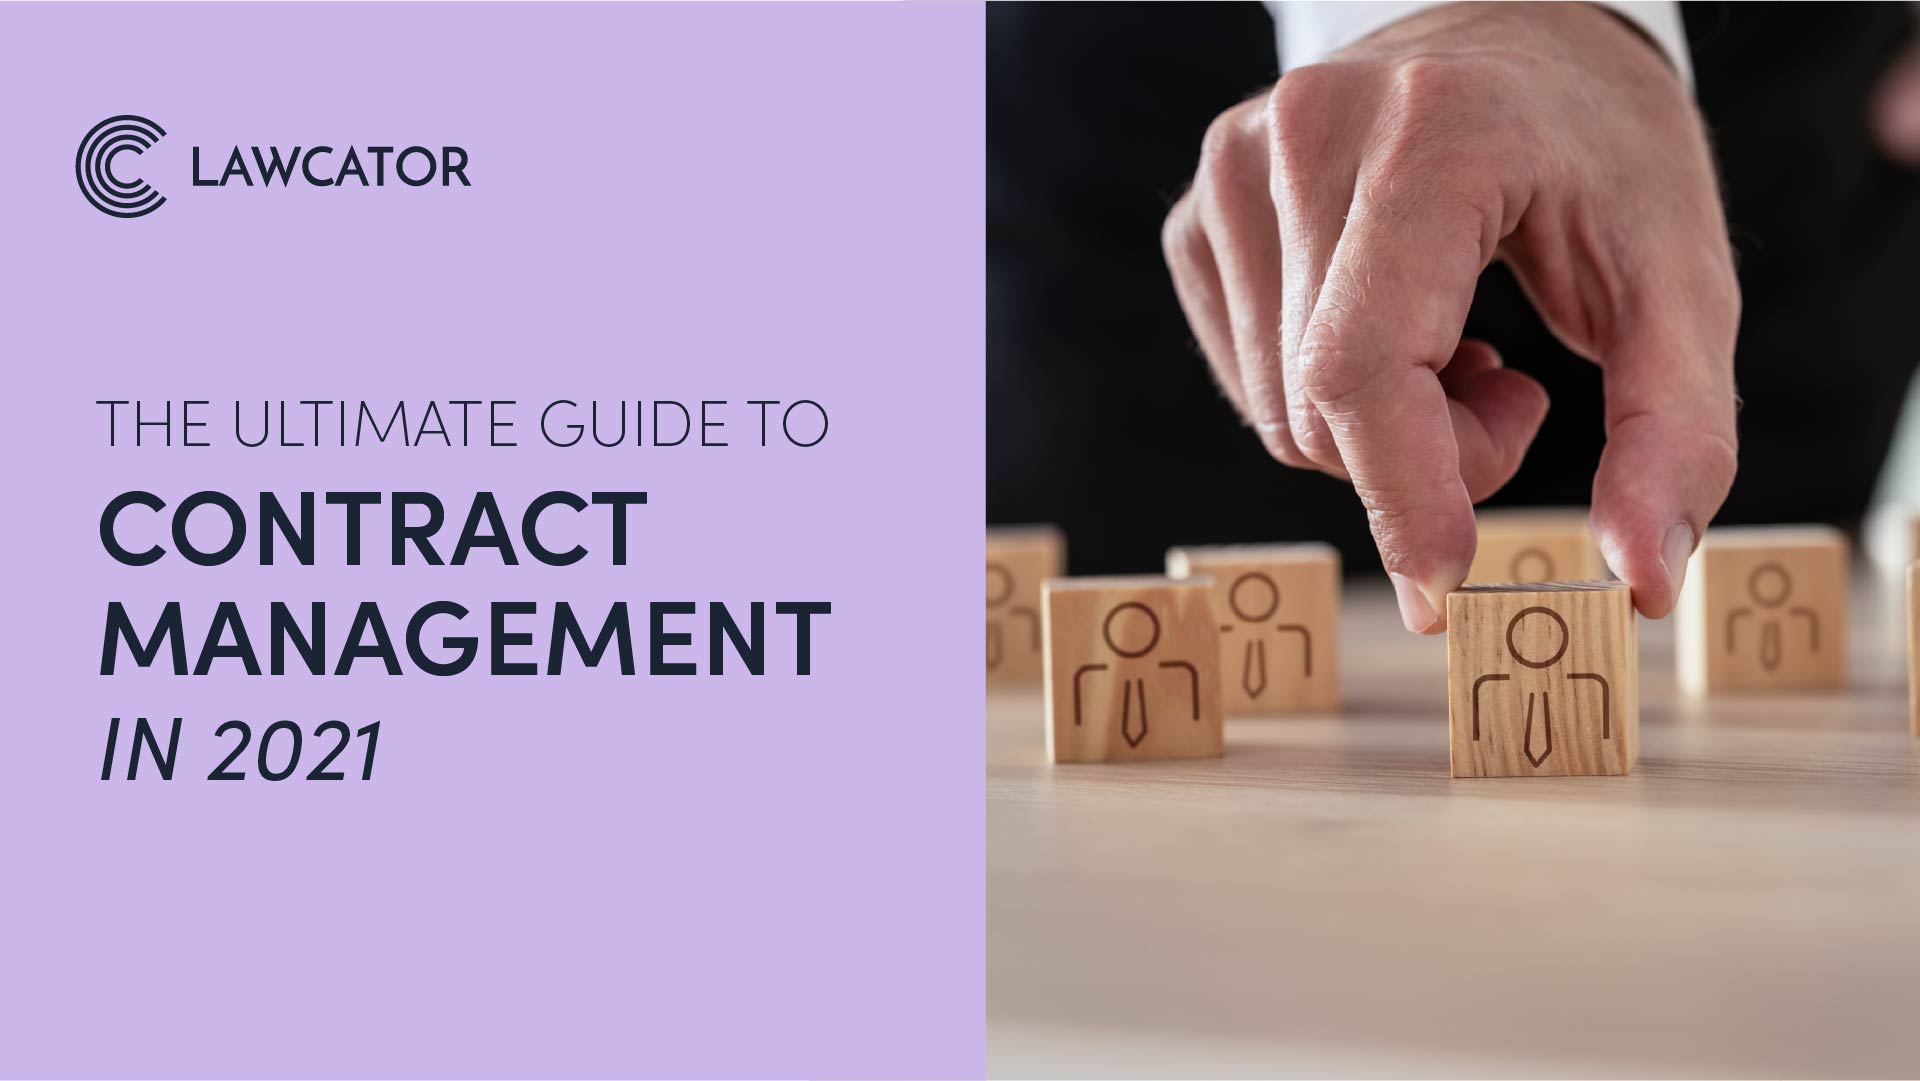 The Ultimate Guide to Contract Management in 2021